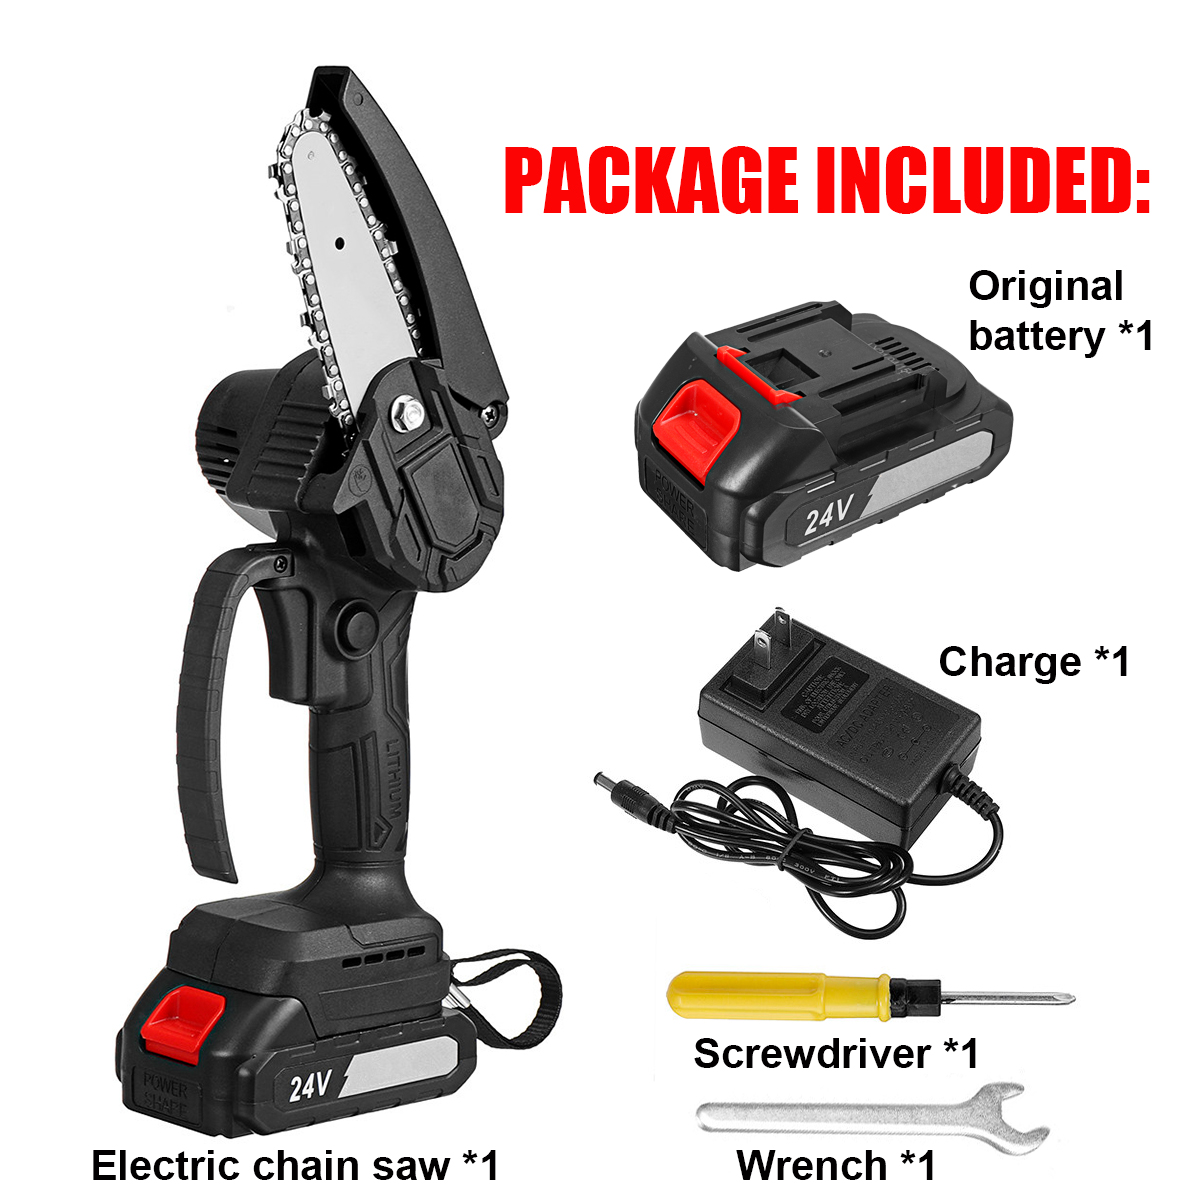 4inch-24V-Rechargeable-Brushless-Electric-Chain-Saw-Woodworking-Tool-Wood-Cutter-ChainSaws-W-12pcs-B-1858870-5